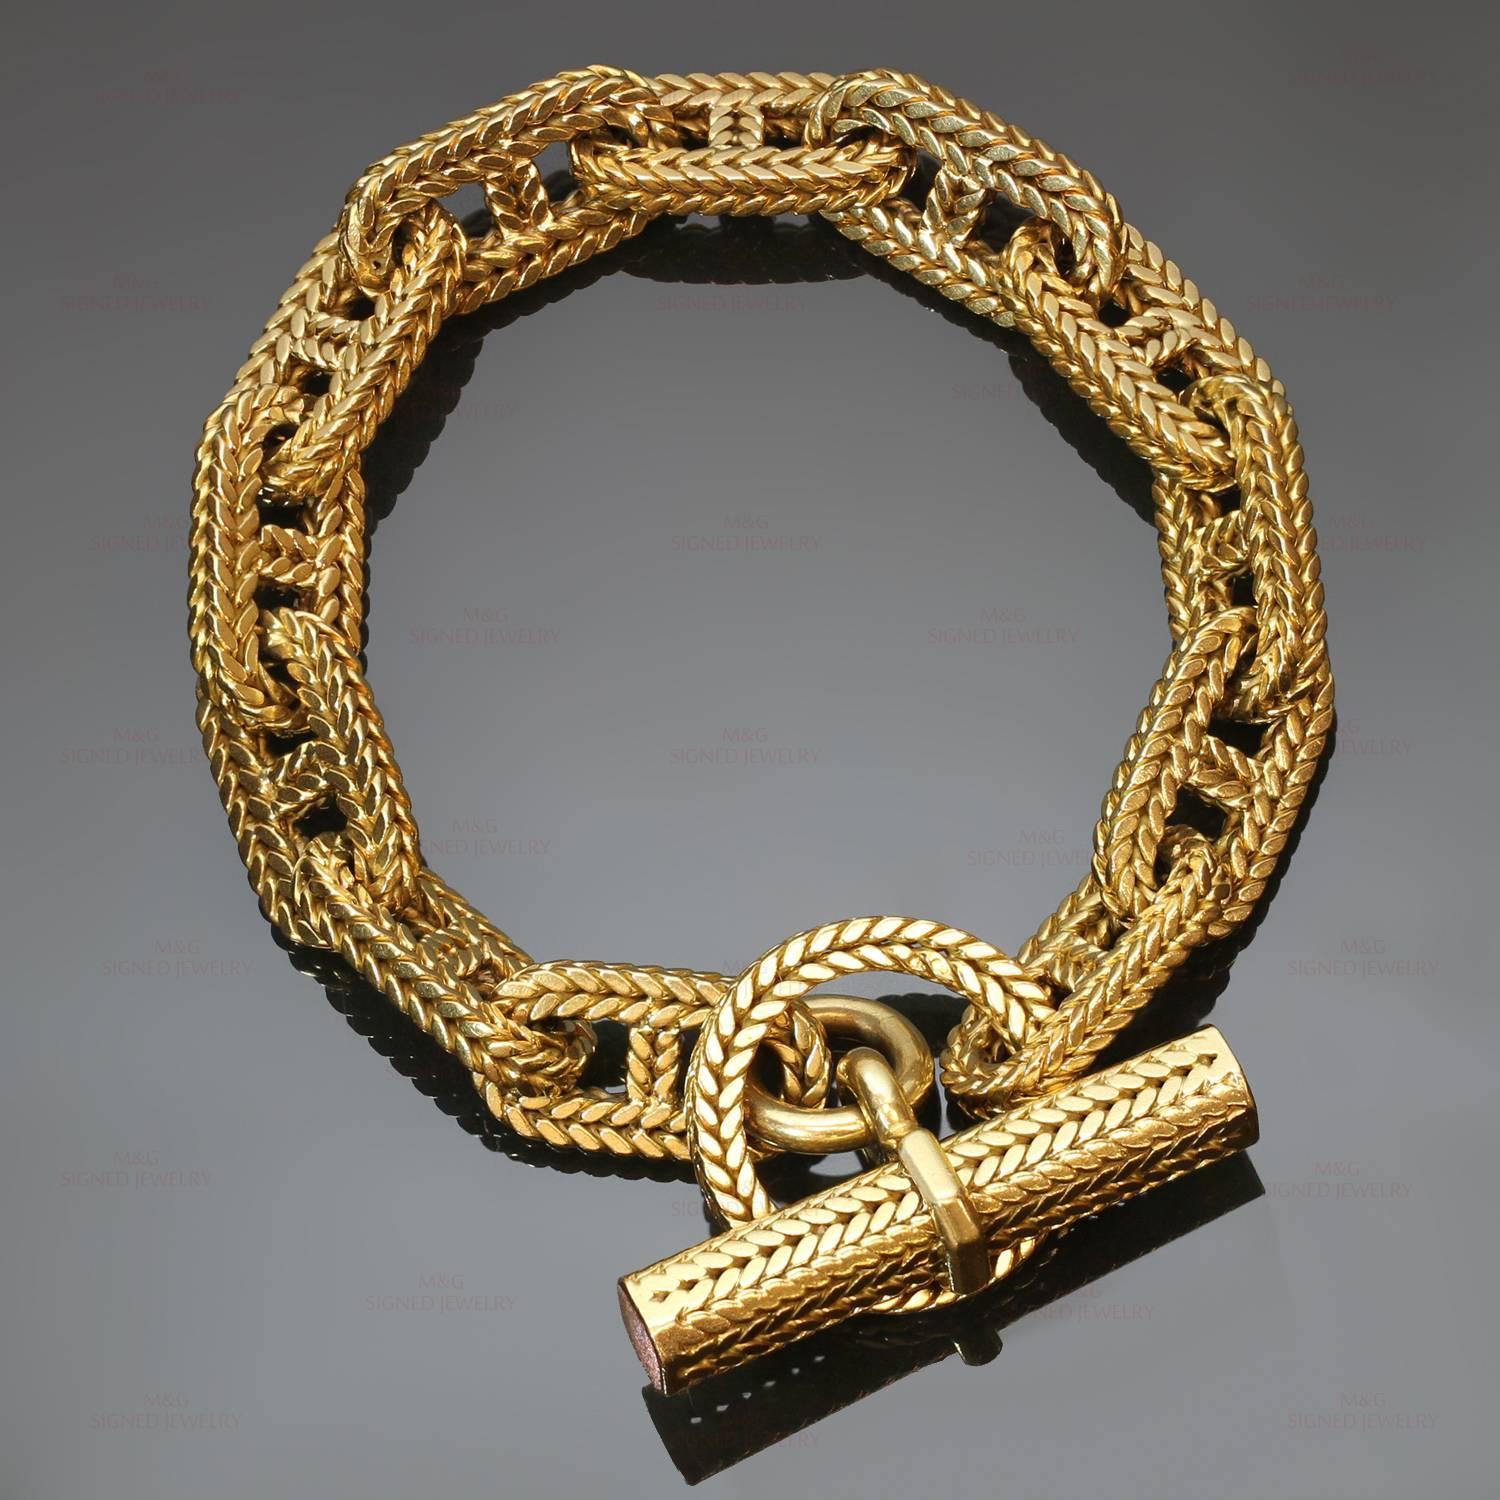 This rare unisex Hermes bracelet is crafted in 18k yellow gold and was designed by George L'enfant for the classic Chain d'Ancre collection. Made in France circa 1960s. Measurements: 1.61